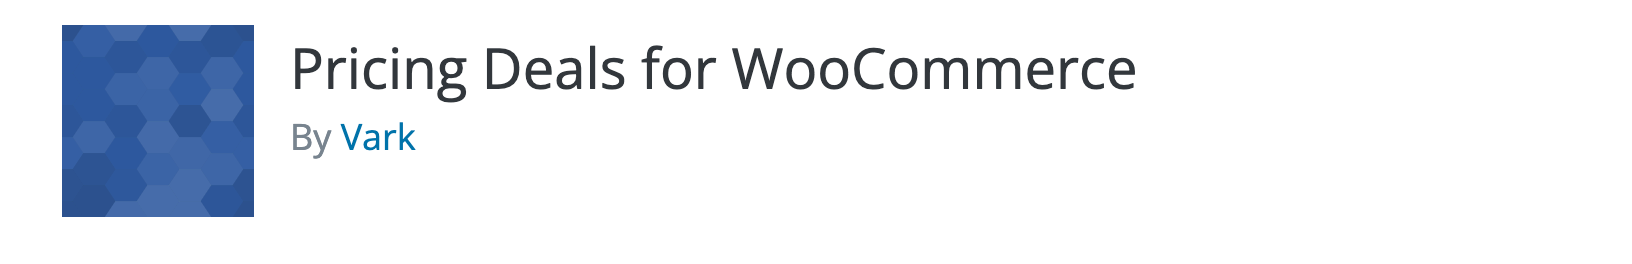 Pricing deals for Woocommerce